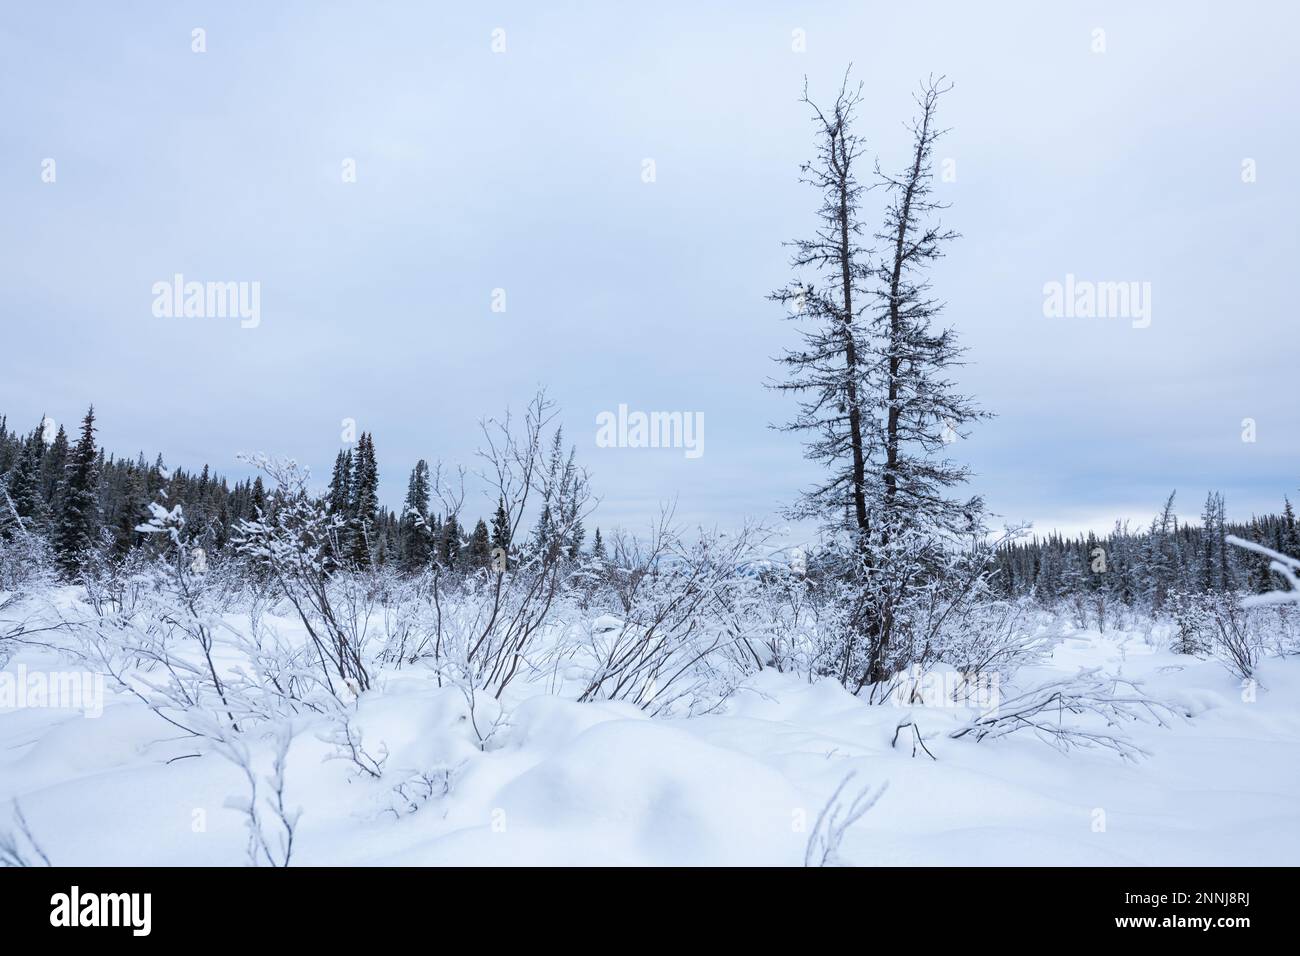 Winter time wilderness landscape views in boreal forest of Canada. Stock Photo